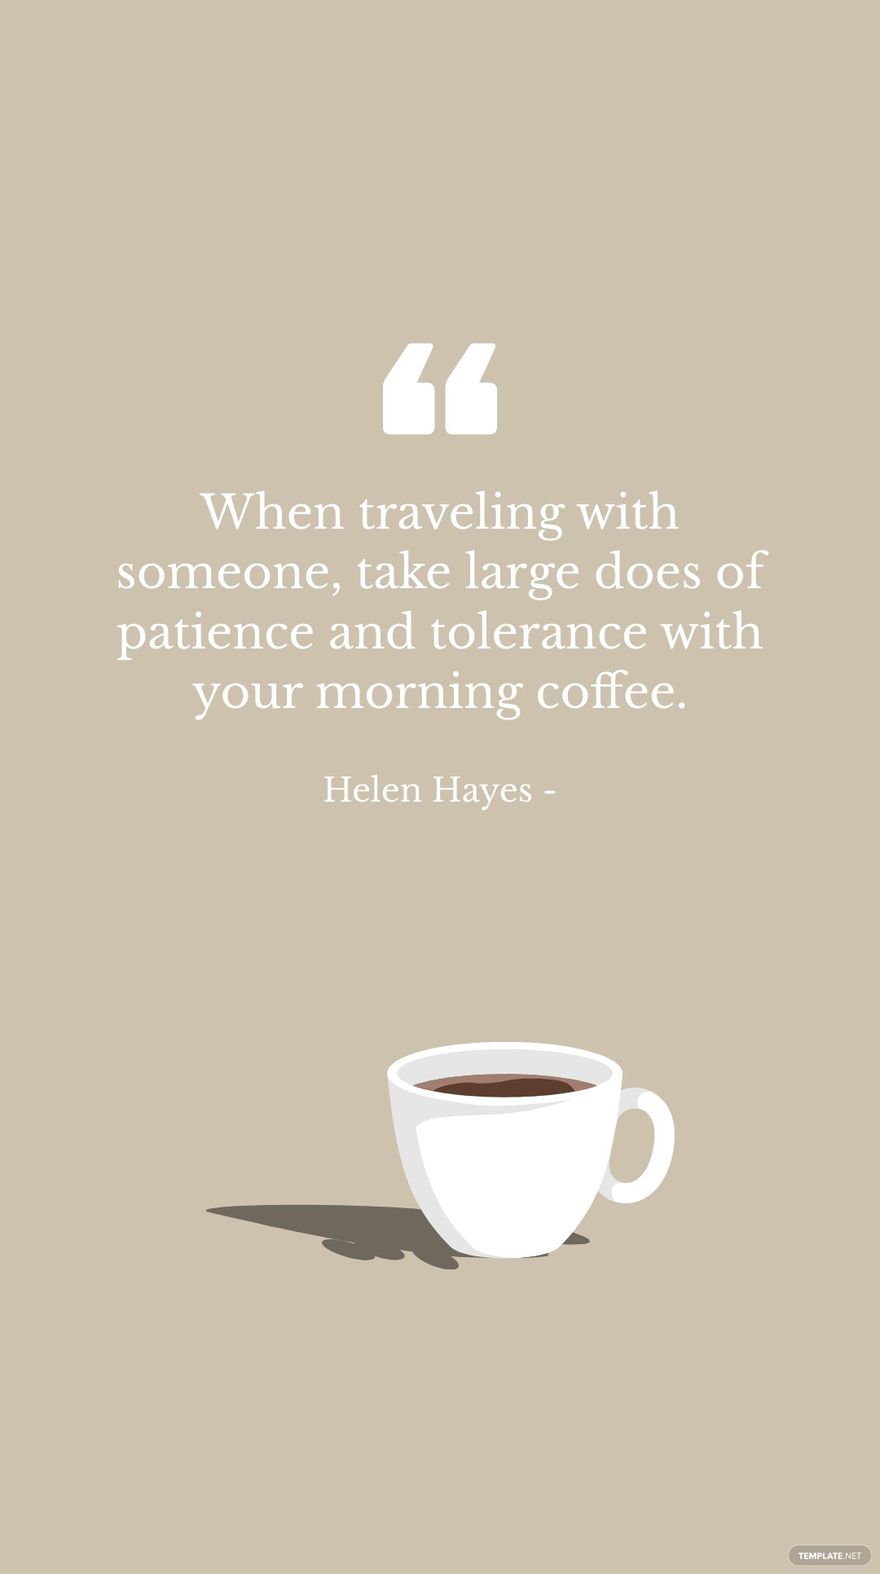 Free Helen Hayes - When traveling with someone, take large does of patience and tolerance with your morning coffee. in JPG